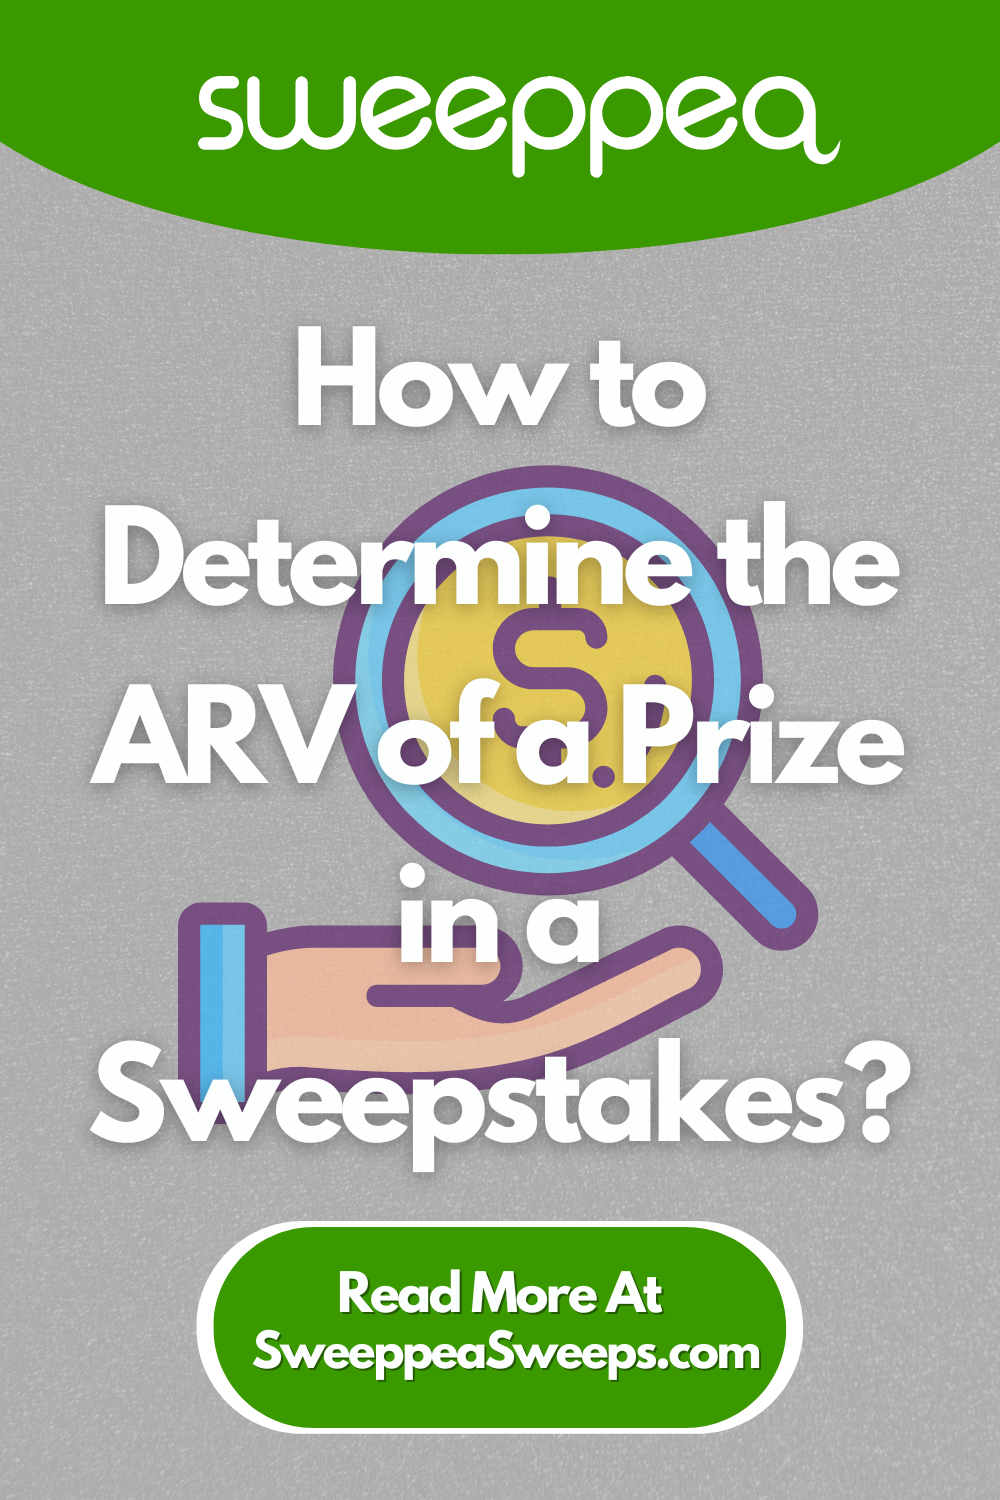 How to Determine the ARV of a Prize in a Sweepstakes?